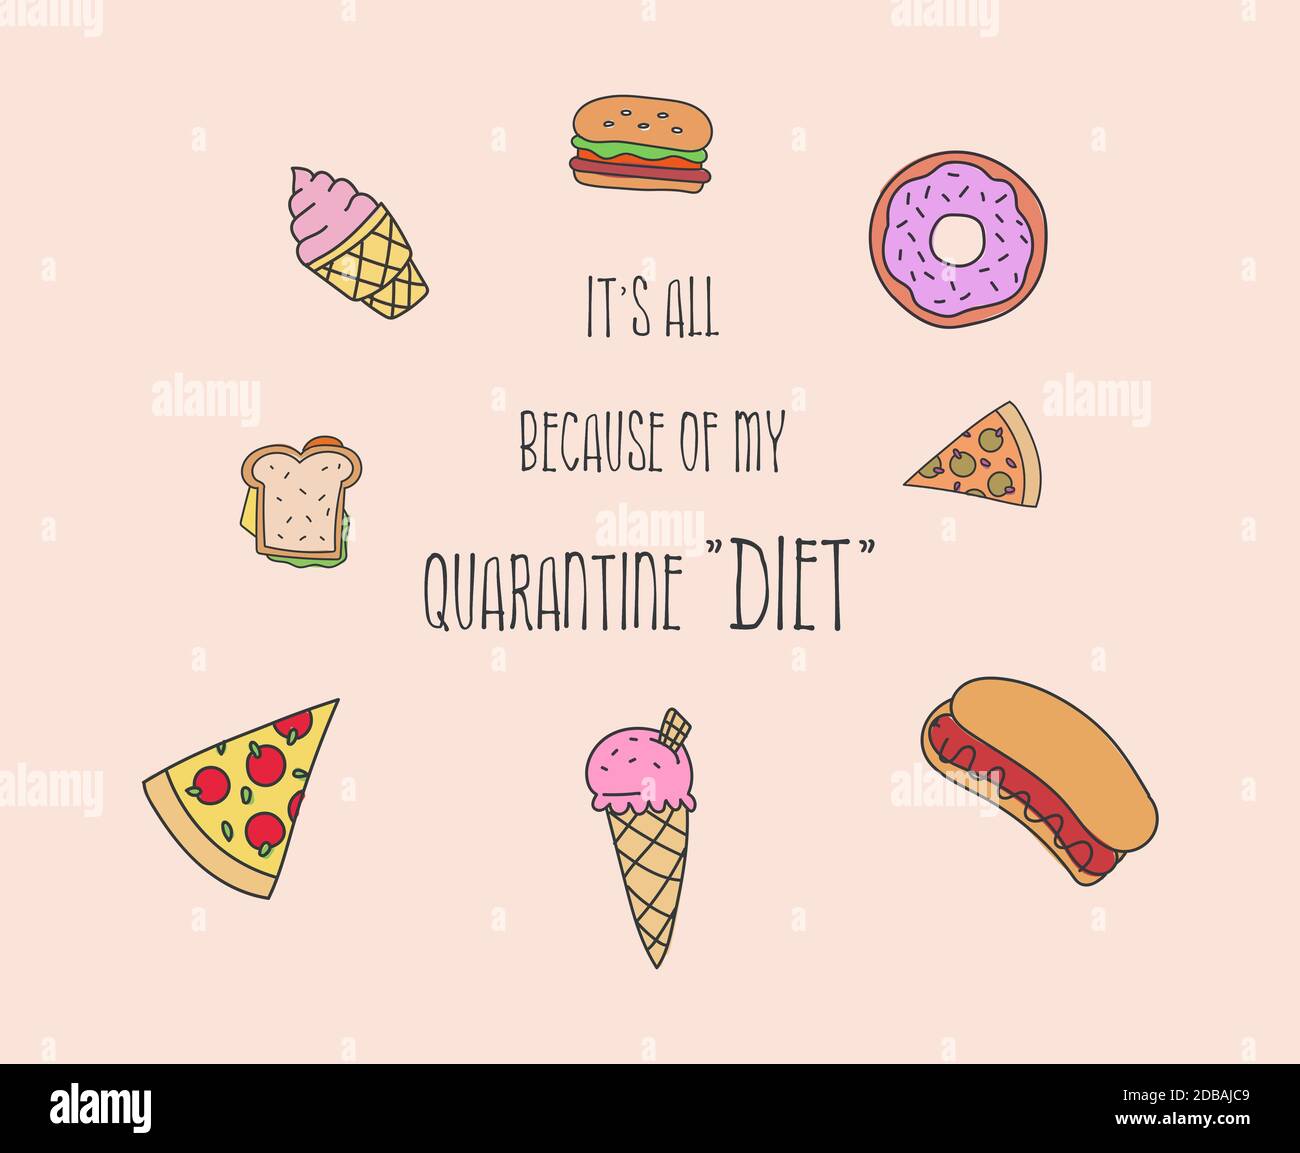 It's all because of my quarantine 'diet'. Funny excuse quote, fast food set, droll text art cartoon illustration. Home isolation high calorie nutritio Stock Photo